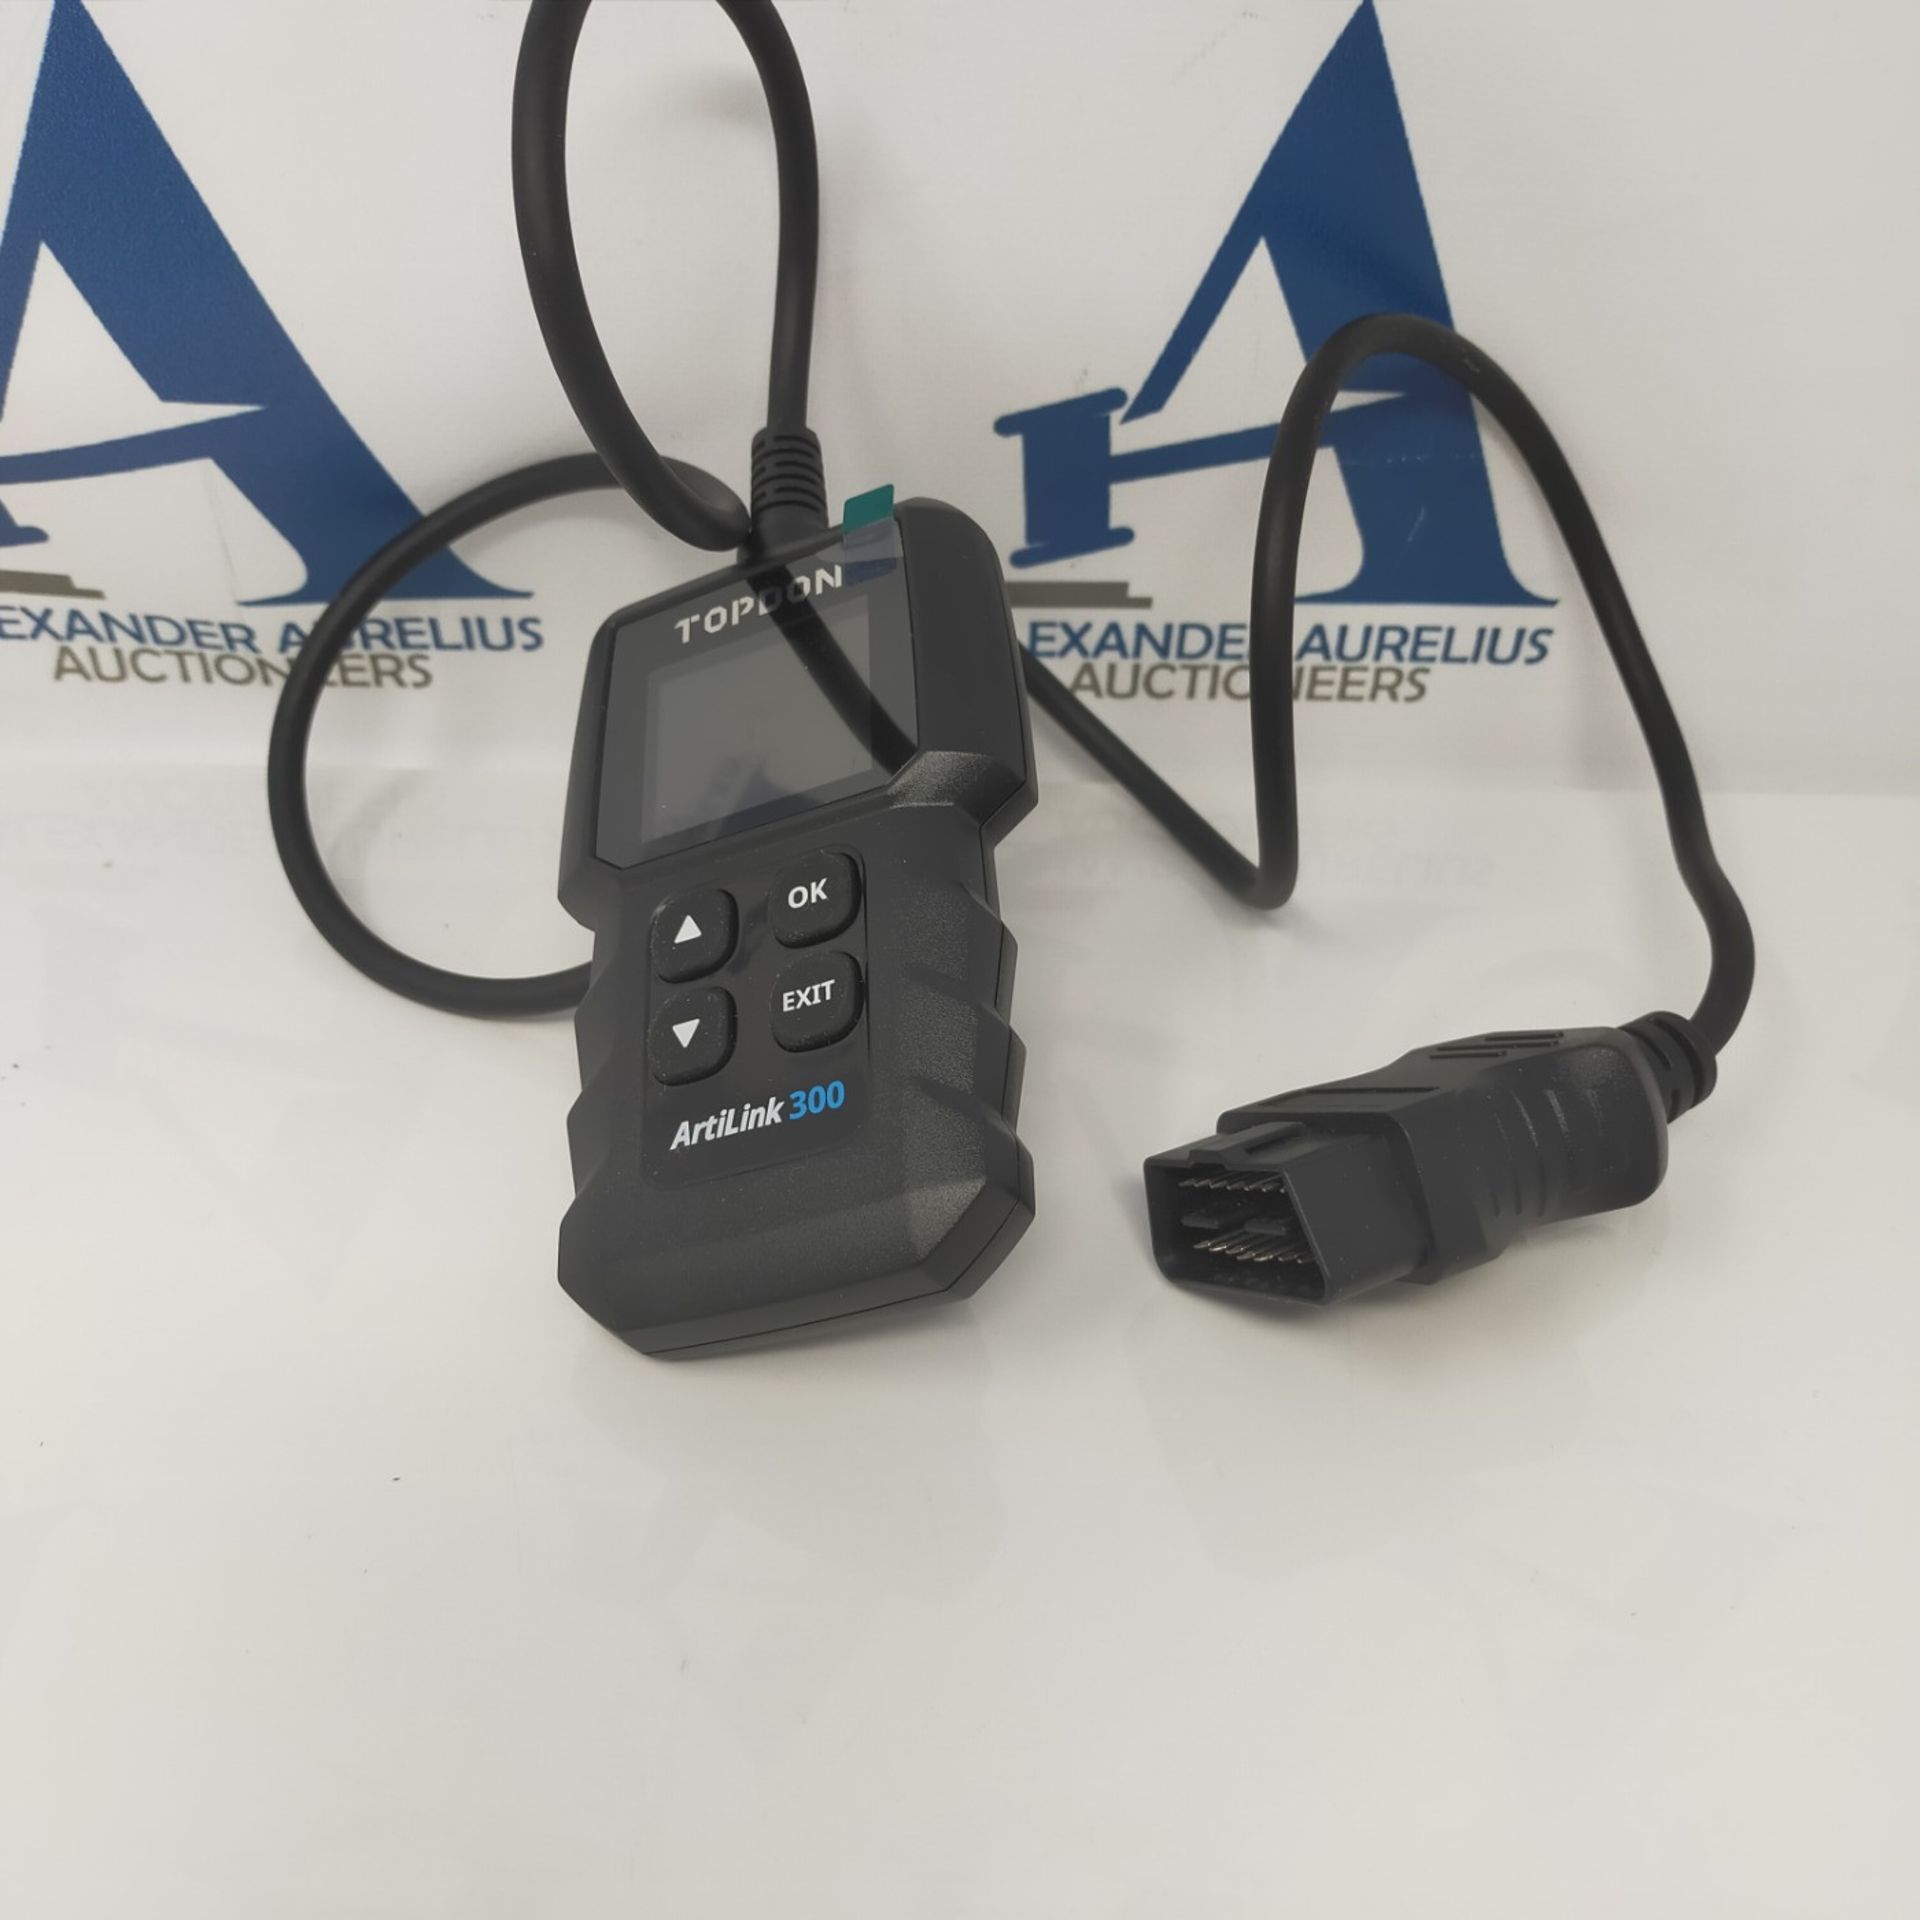 TOPDON AL300, OBD2 Scanner Code Reader, car Auto Diagnostic Tool with Full OBD2 Functi - Image 2 of 2